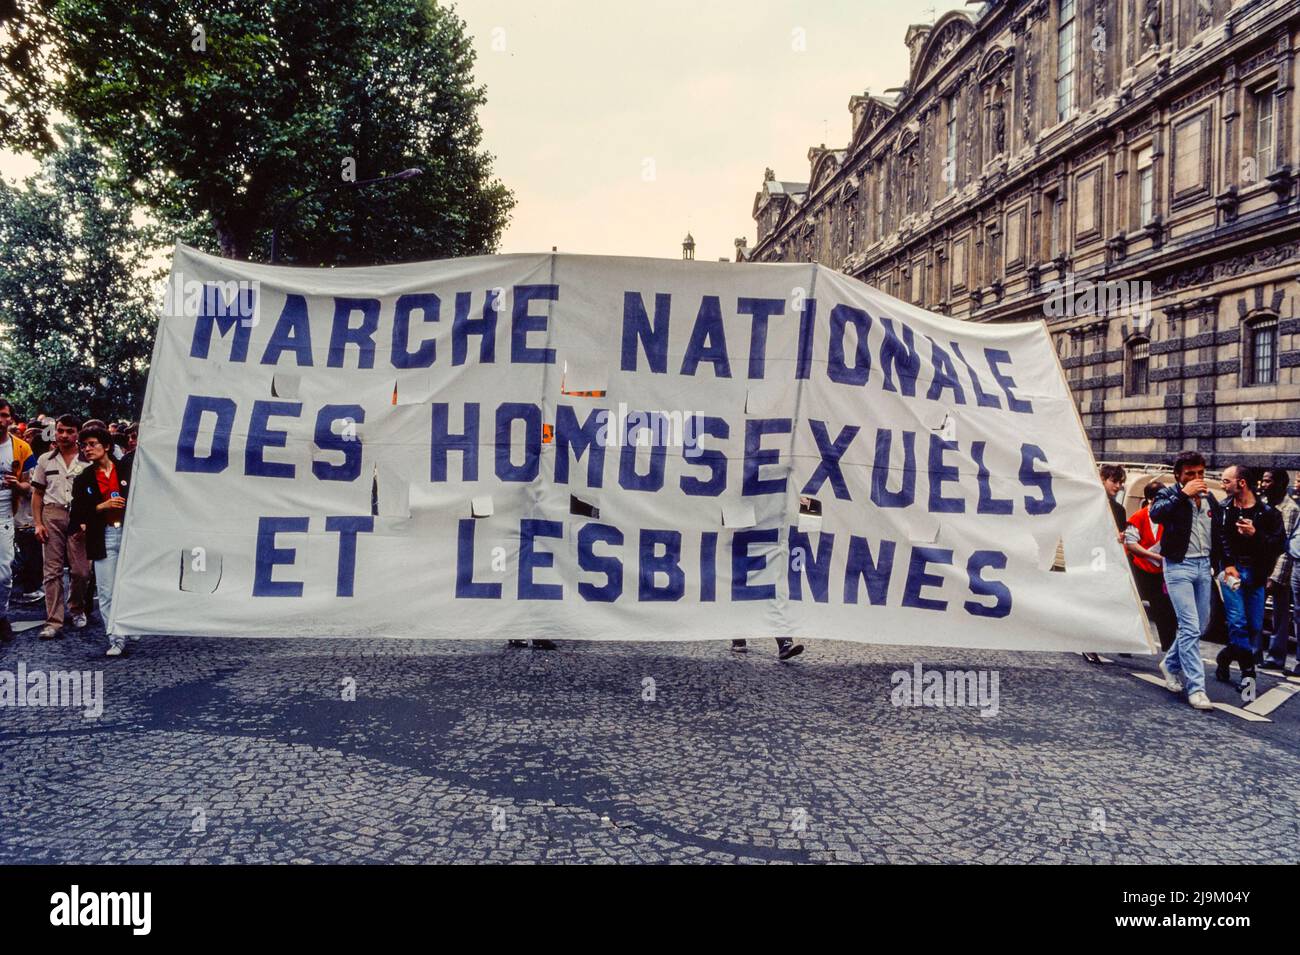 Paris, France, Crowd People Marching with Protest Banner 'National March of Homosexuals and Lesbians' LGBT Fierté, Gay Pride March, 1982, 1980s gay protest vintage, paris archive photos Stock Photo